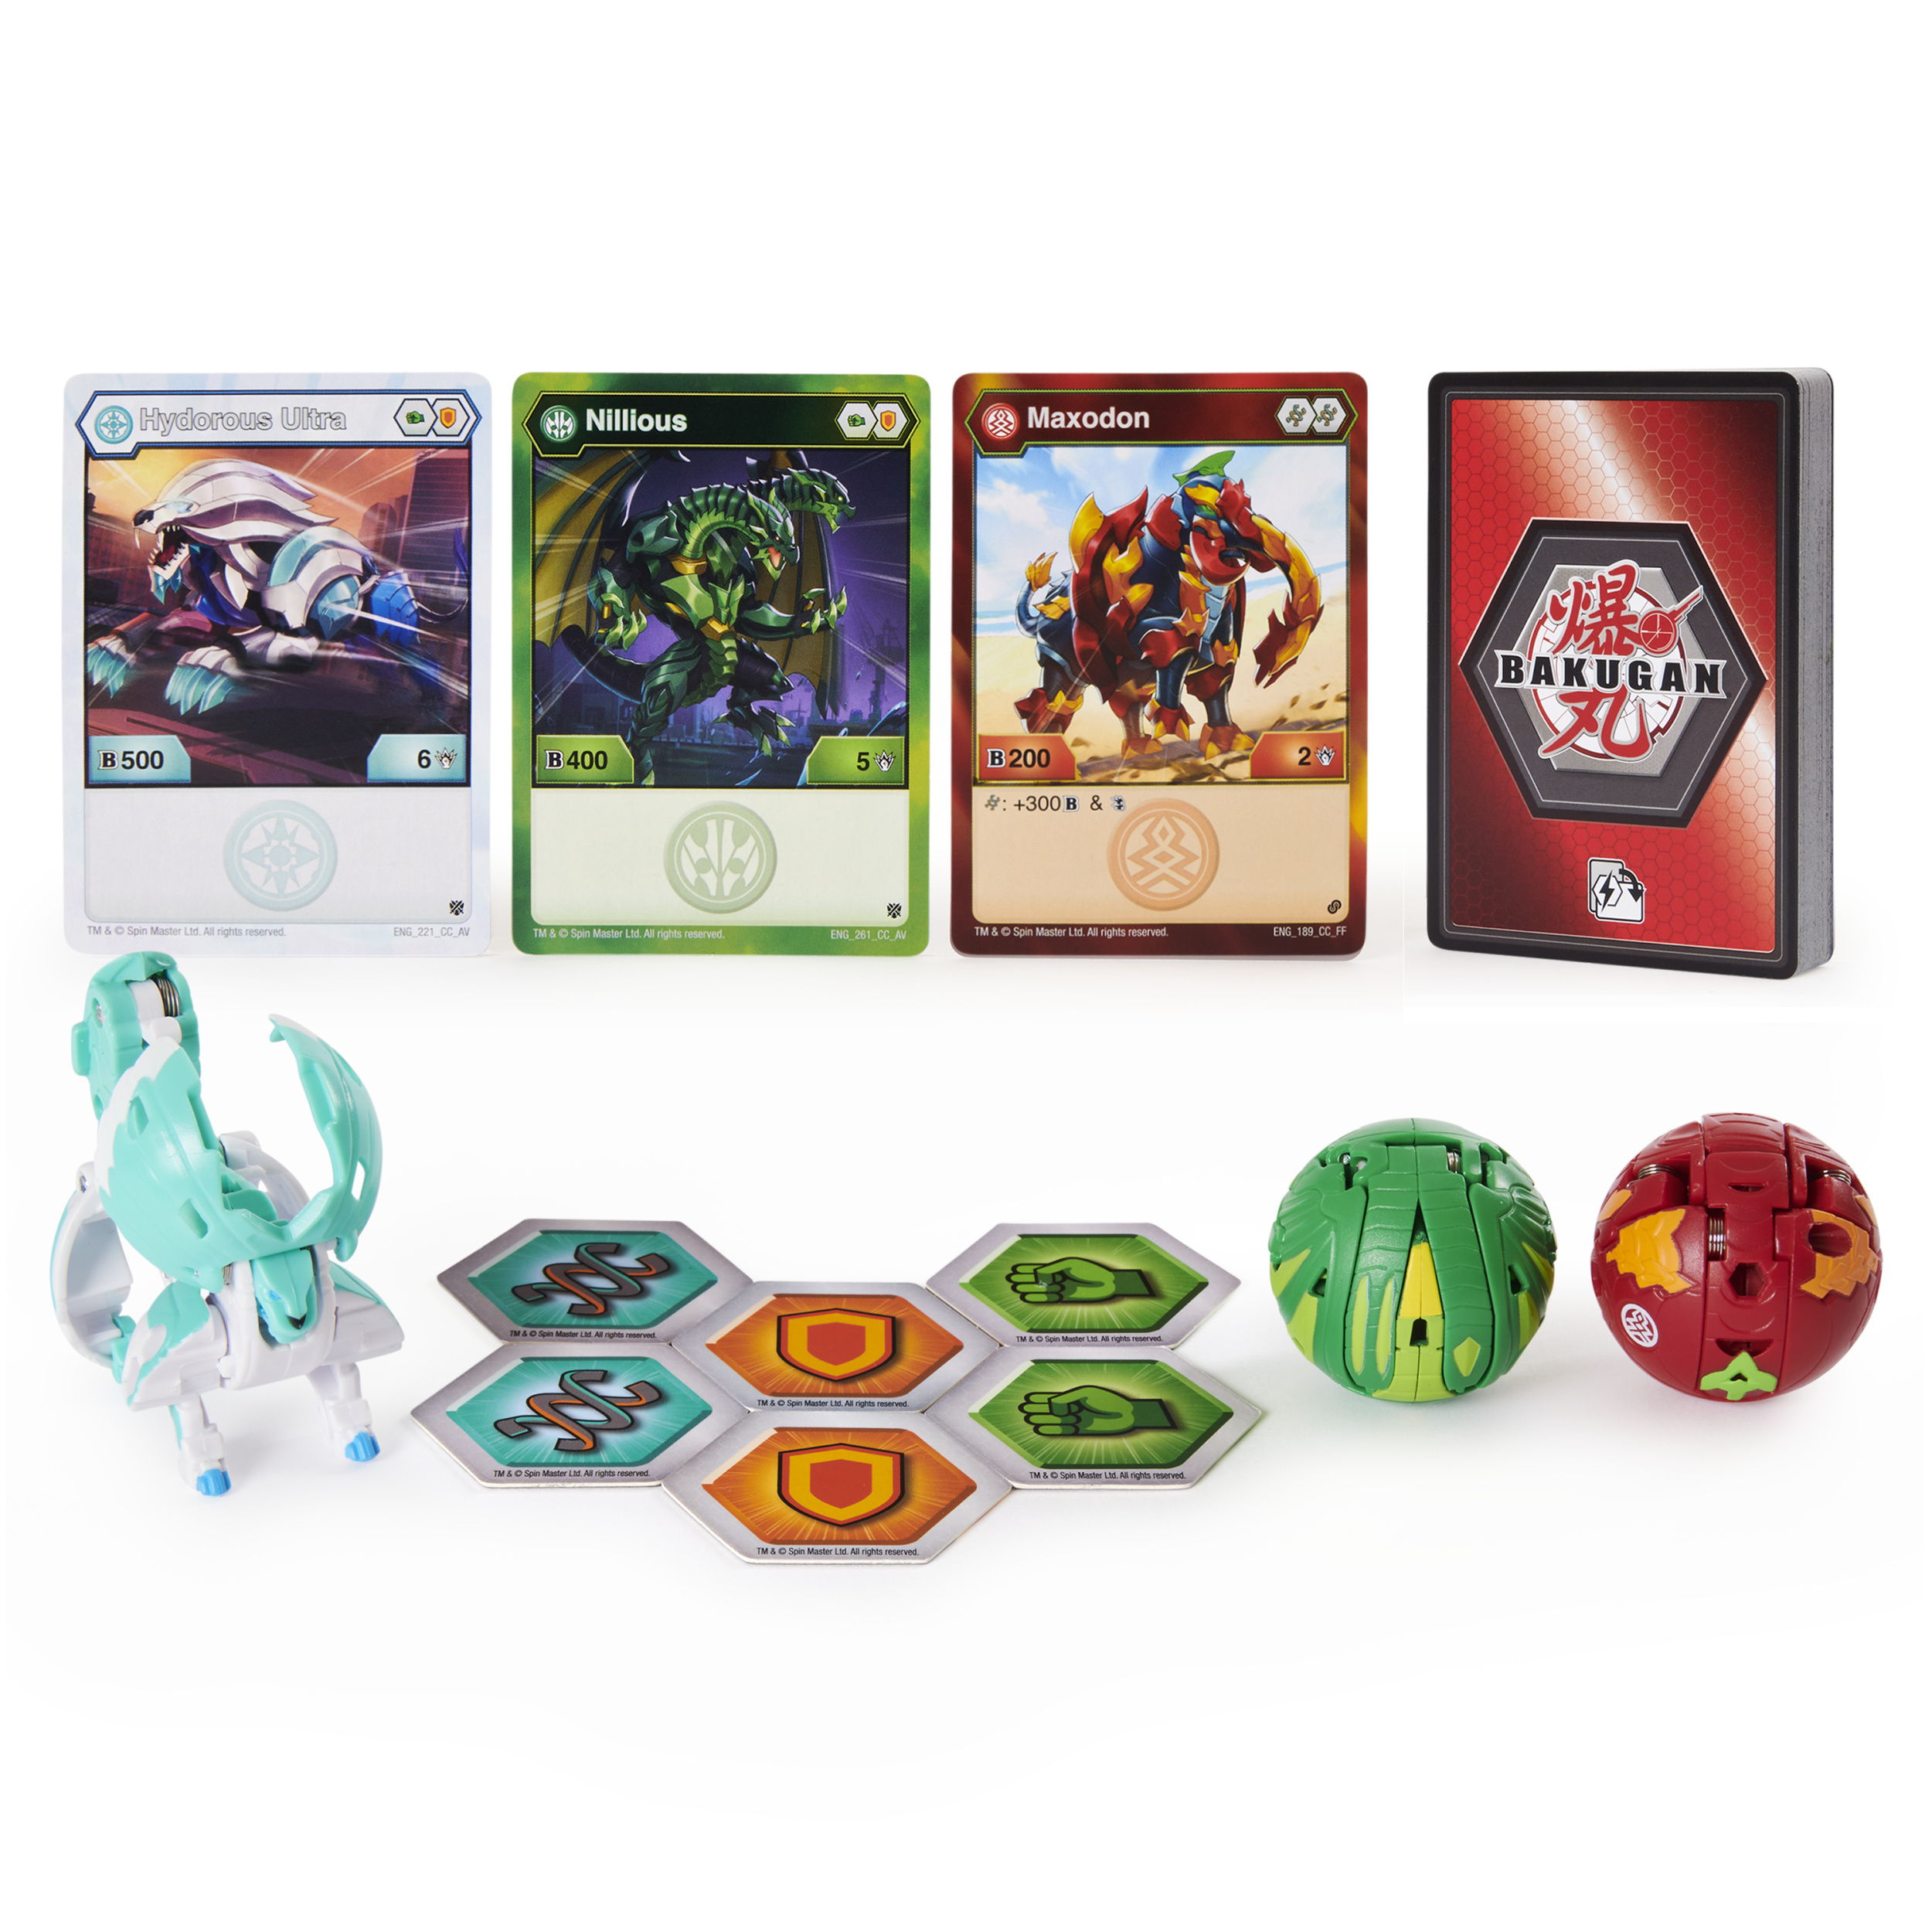 Bakugan Pro, Armored Elite Starter Set with Hydorous Ultra, 2 Bakugan and Collectible Trading Cards - image 2 of 5